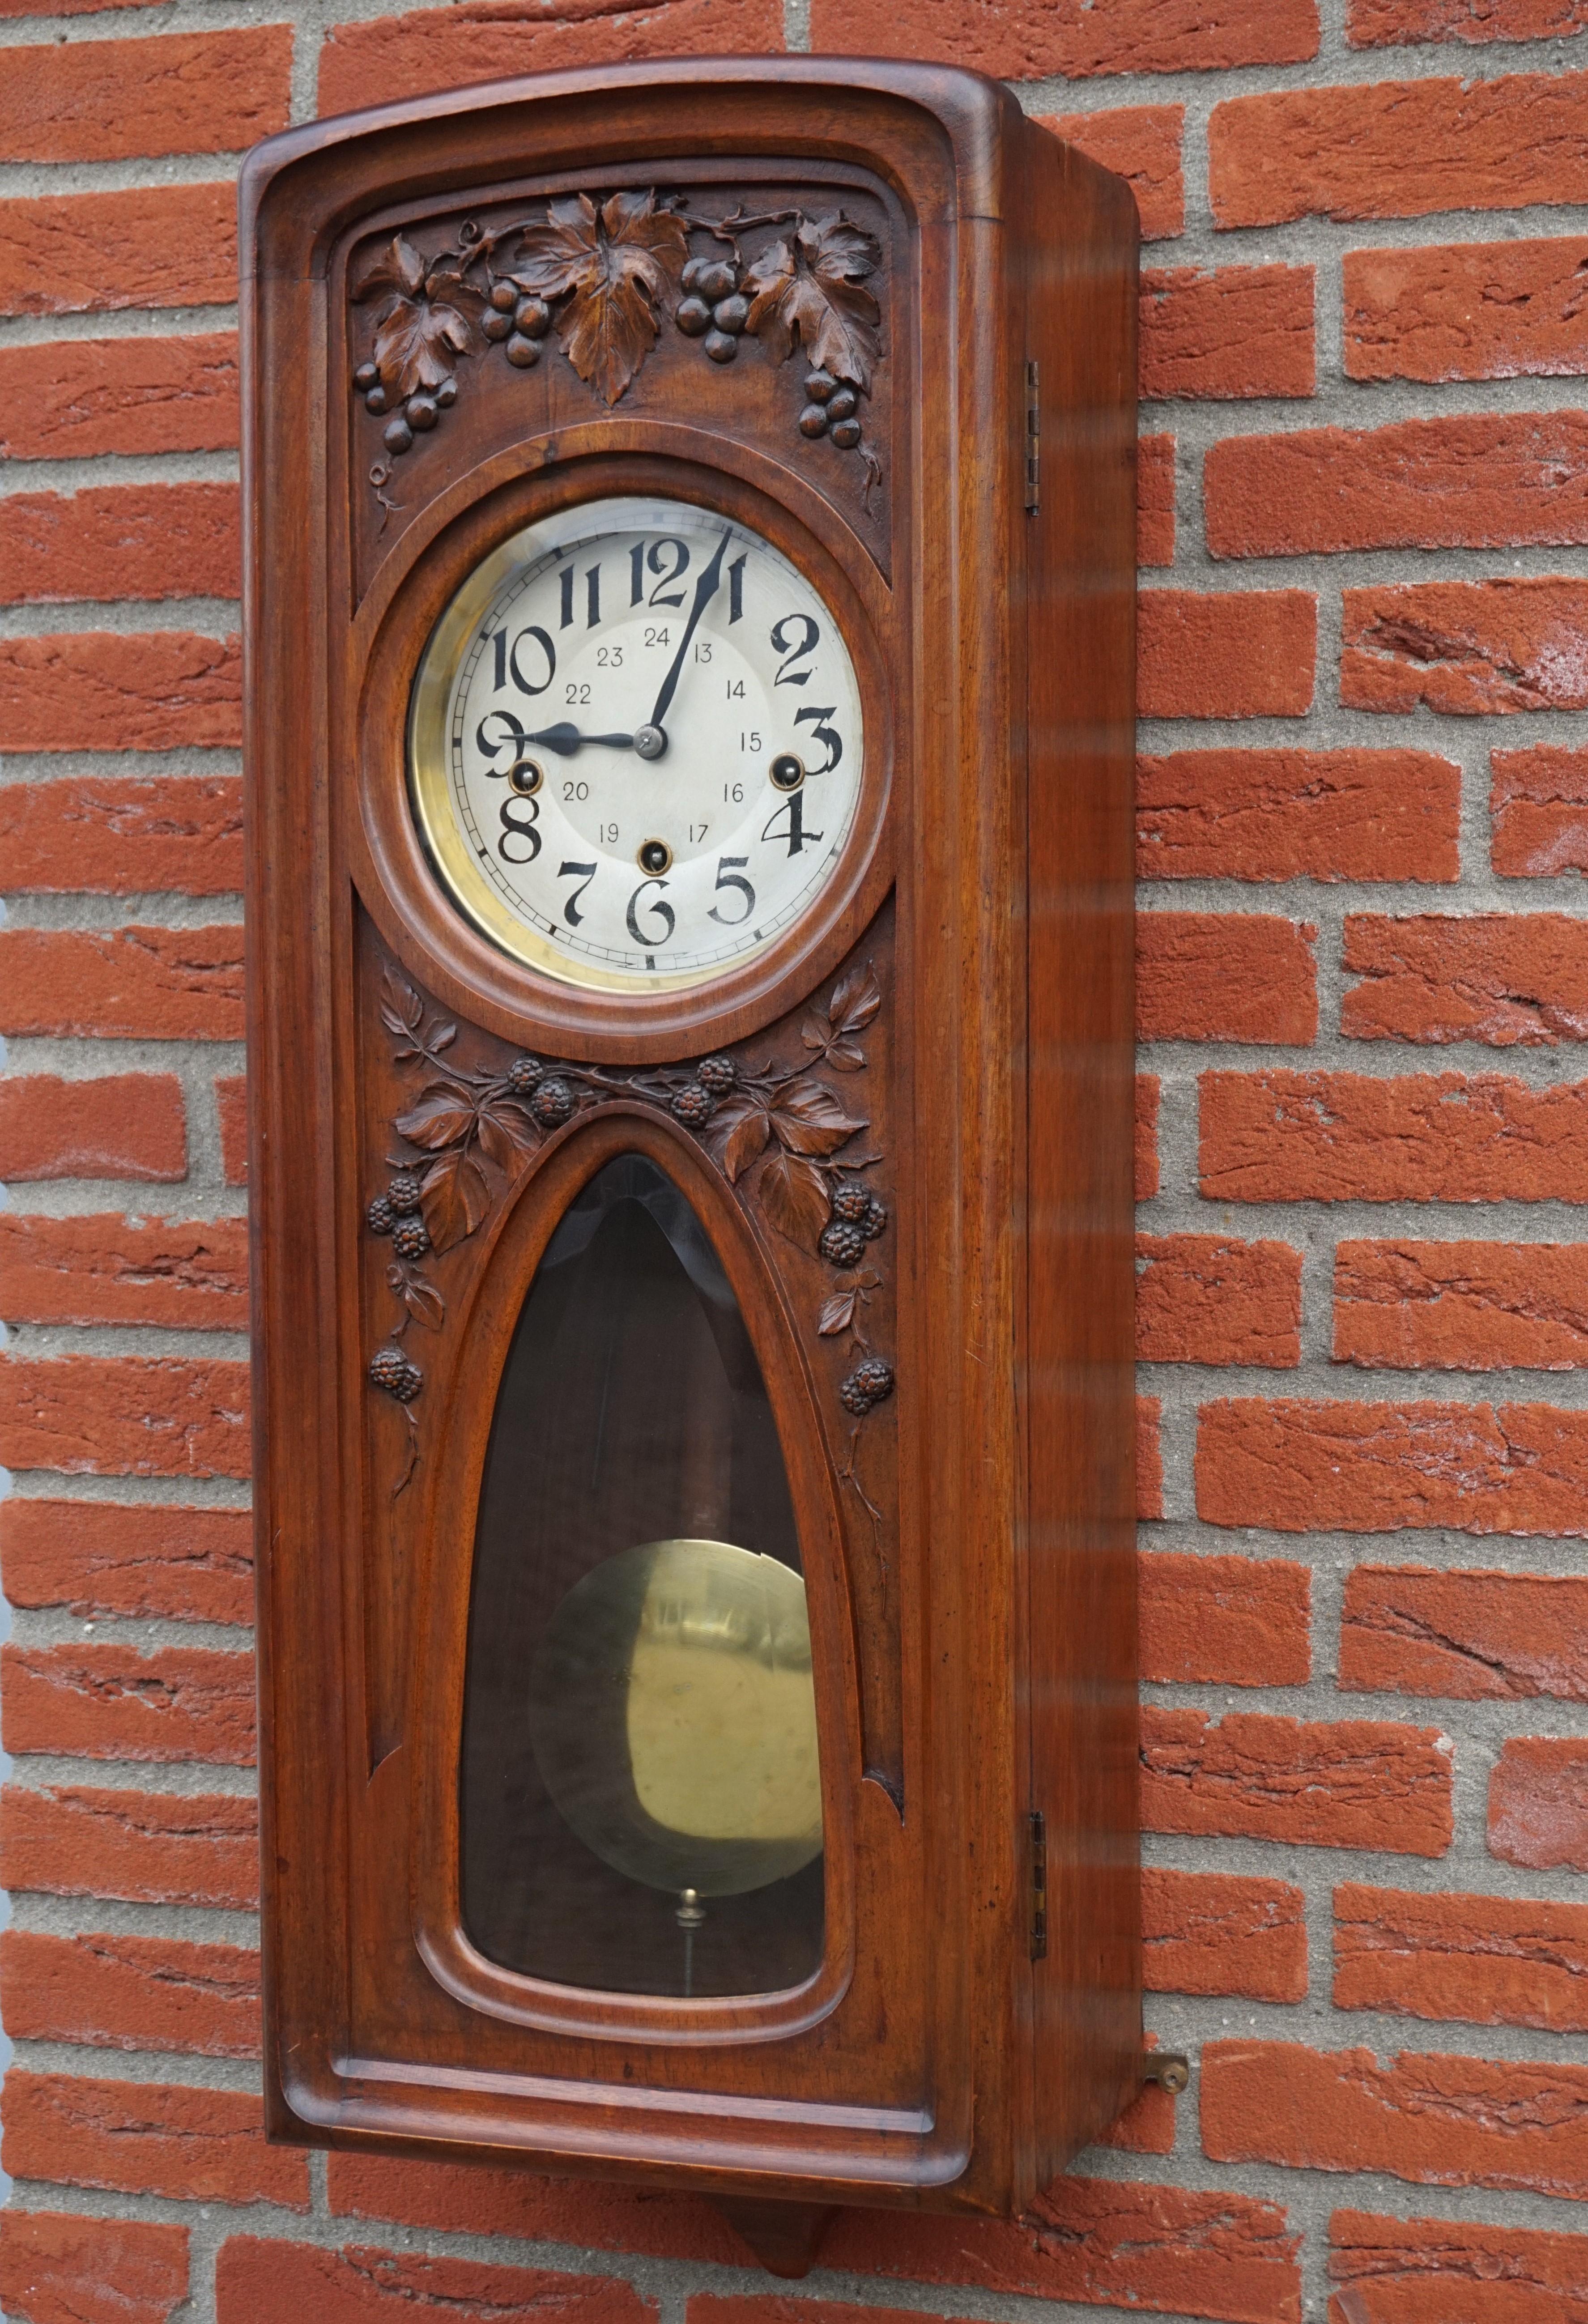 Stunning and perfect working antique wall clock, made of solid walnut.

Over the years we have sold a number of unique and beautiful wall clocks and this one of a kind specimen is right up there with the finest. The quality of the hand carved grape